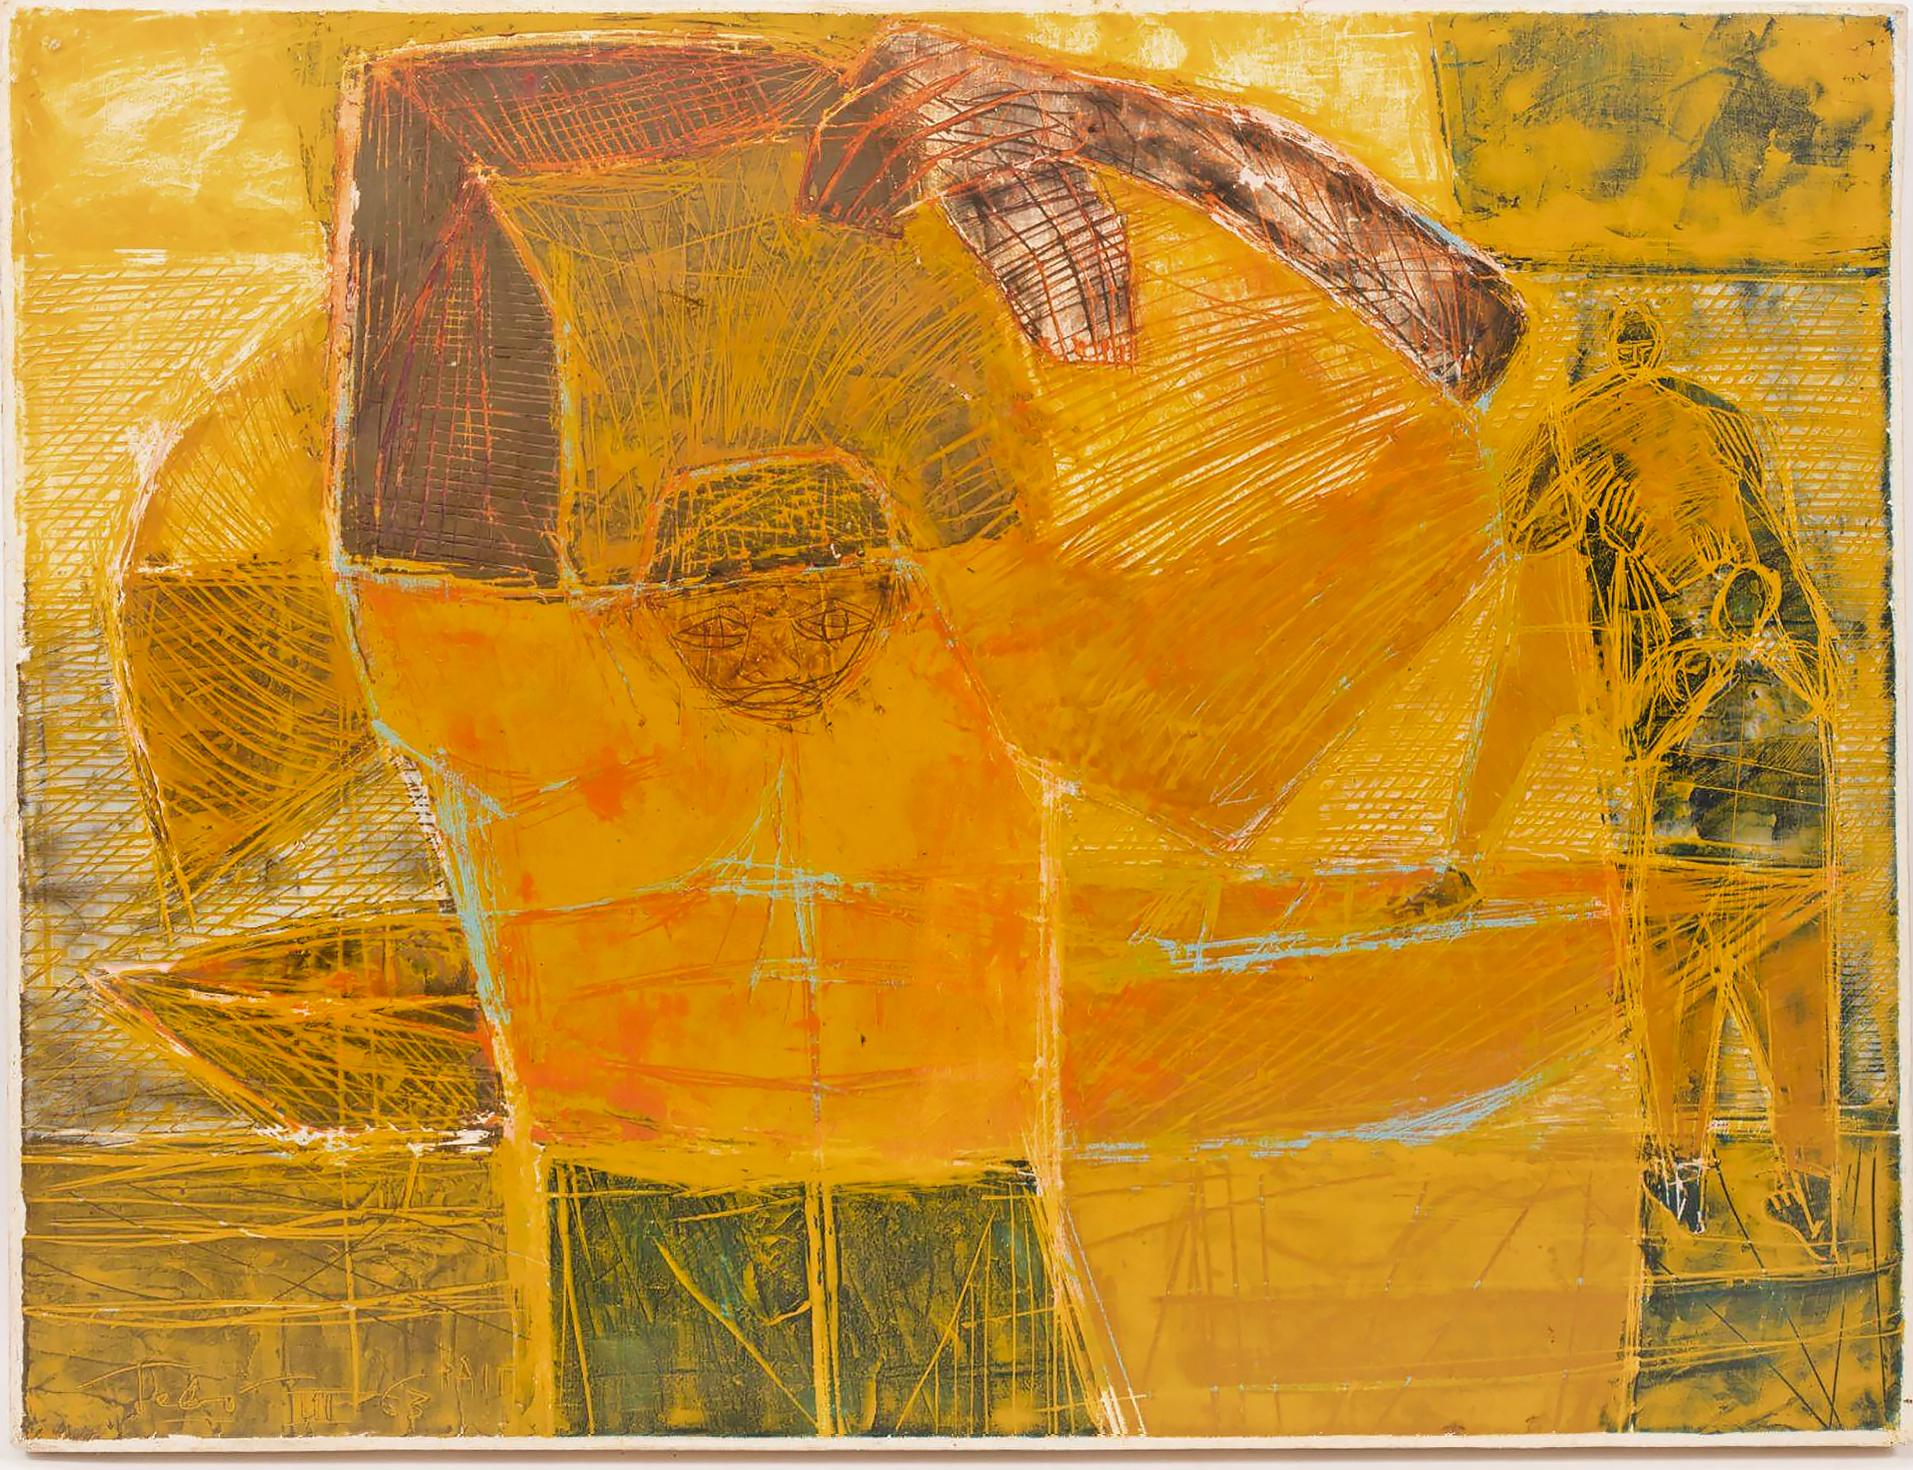 Sacha Thebaud Tebo Figurative Painting - Yellow Ship with Workers Unloading  - Caribbean Art - Encaustic